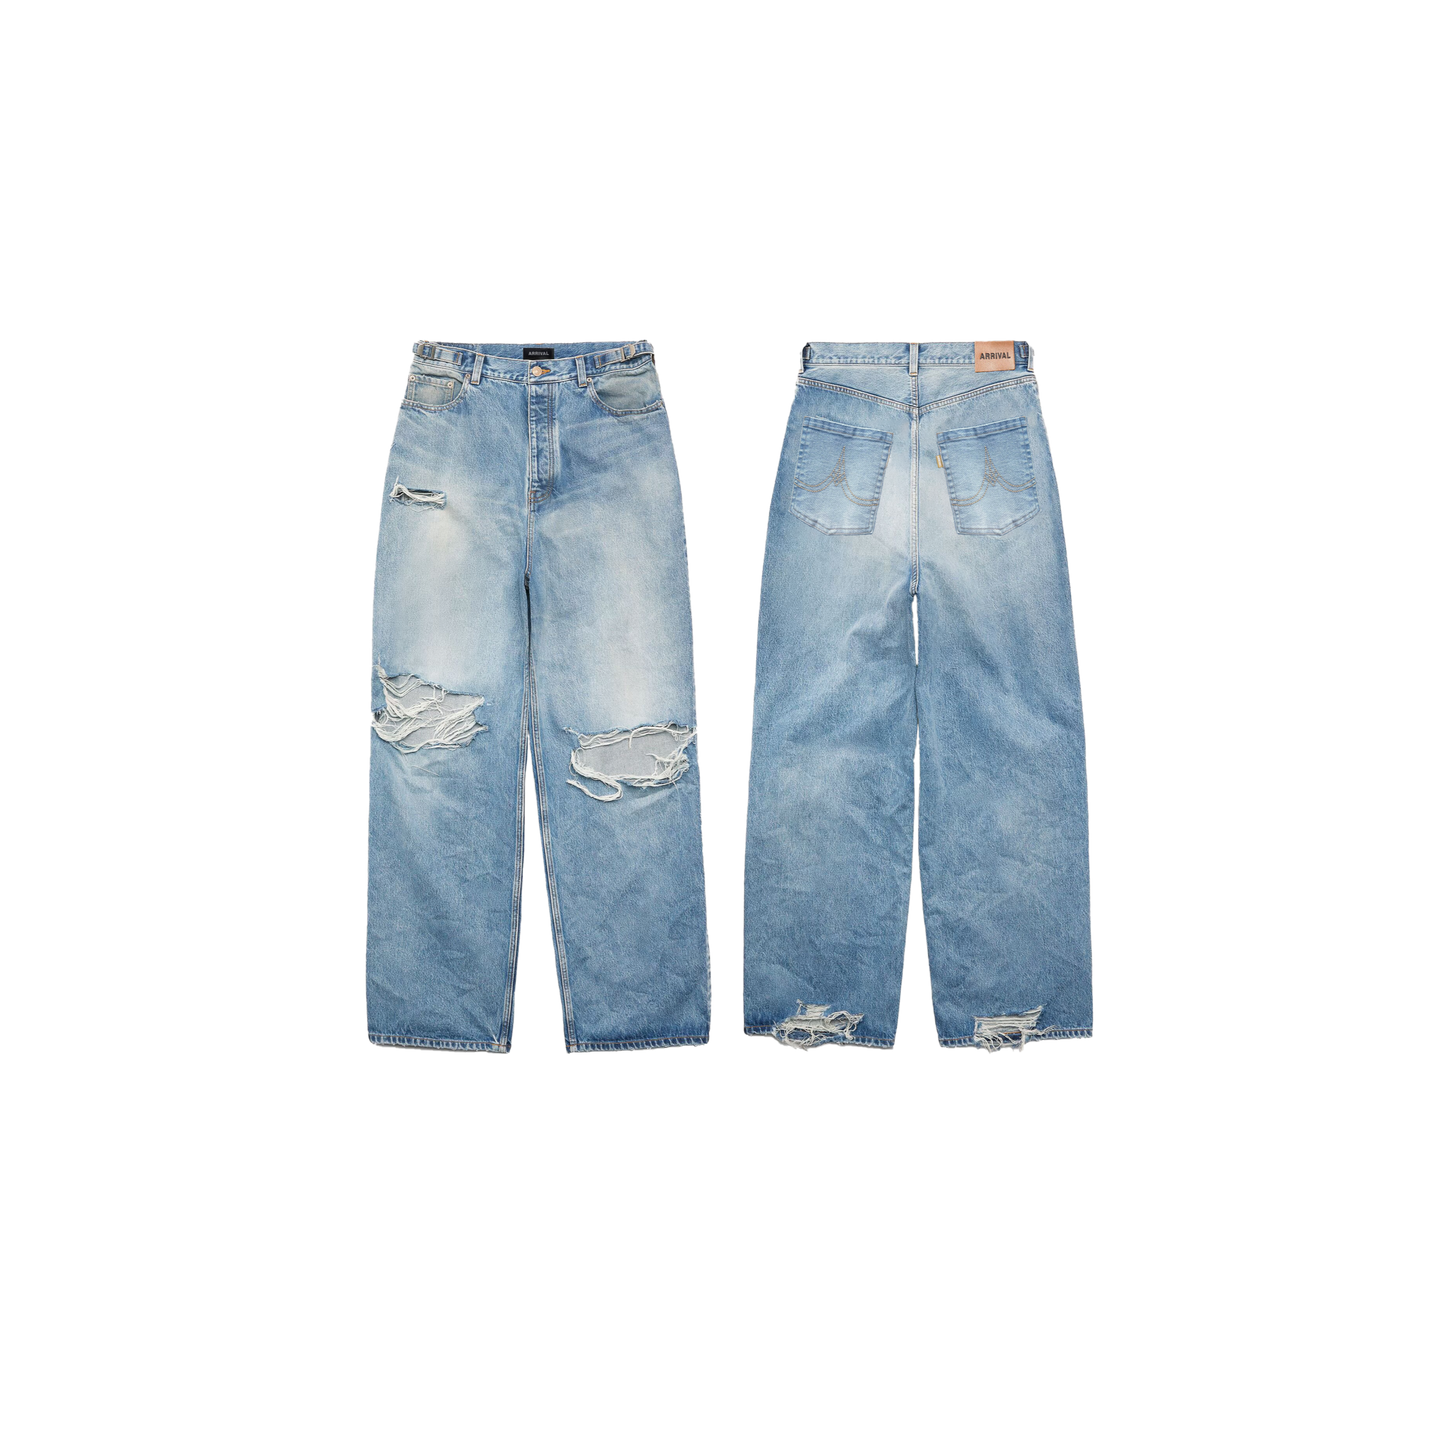 SIGNATURE BAGGY JEANS – Arrival Worldwide